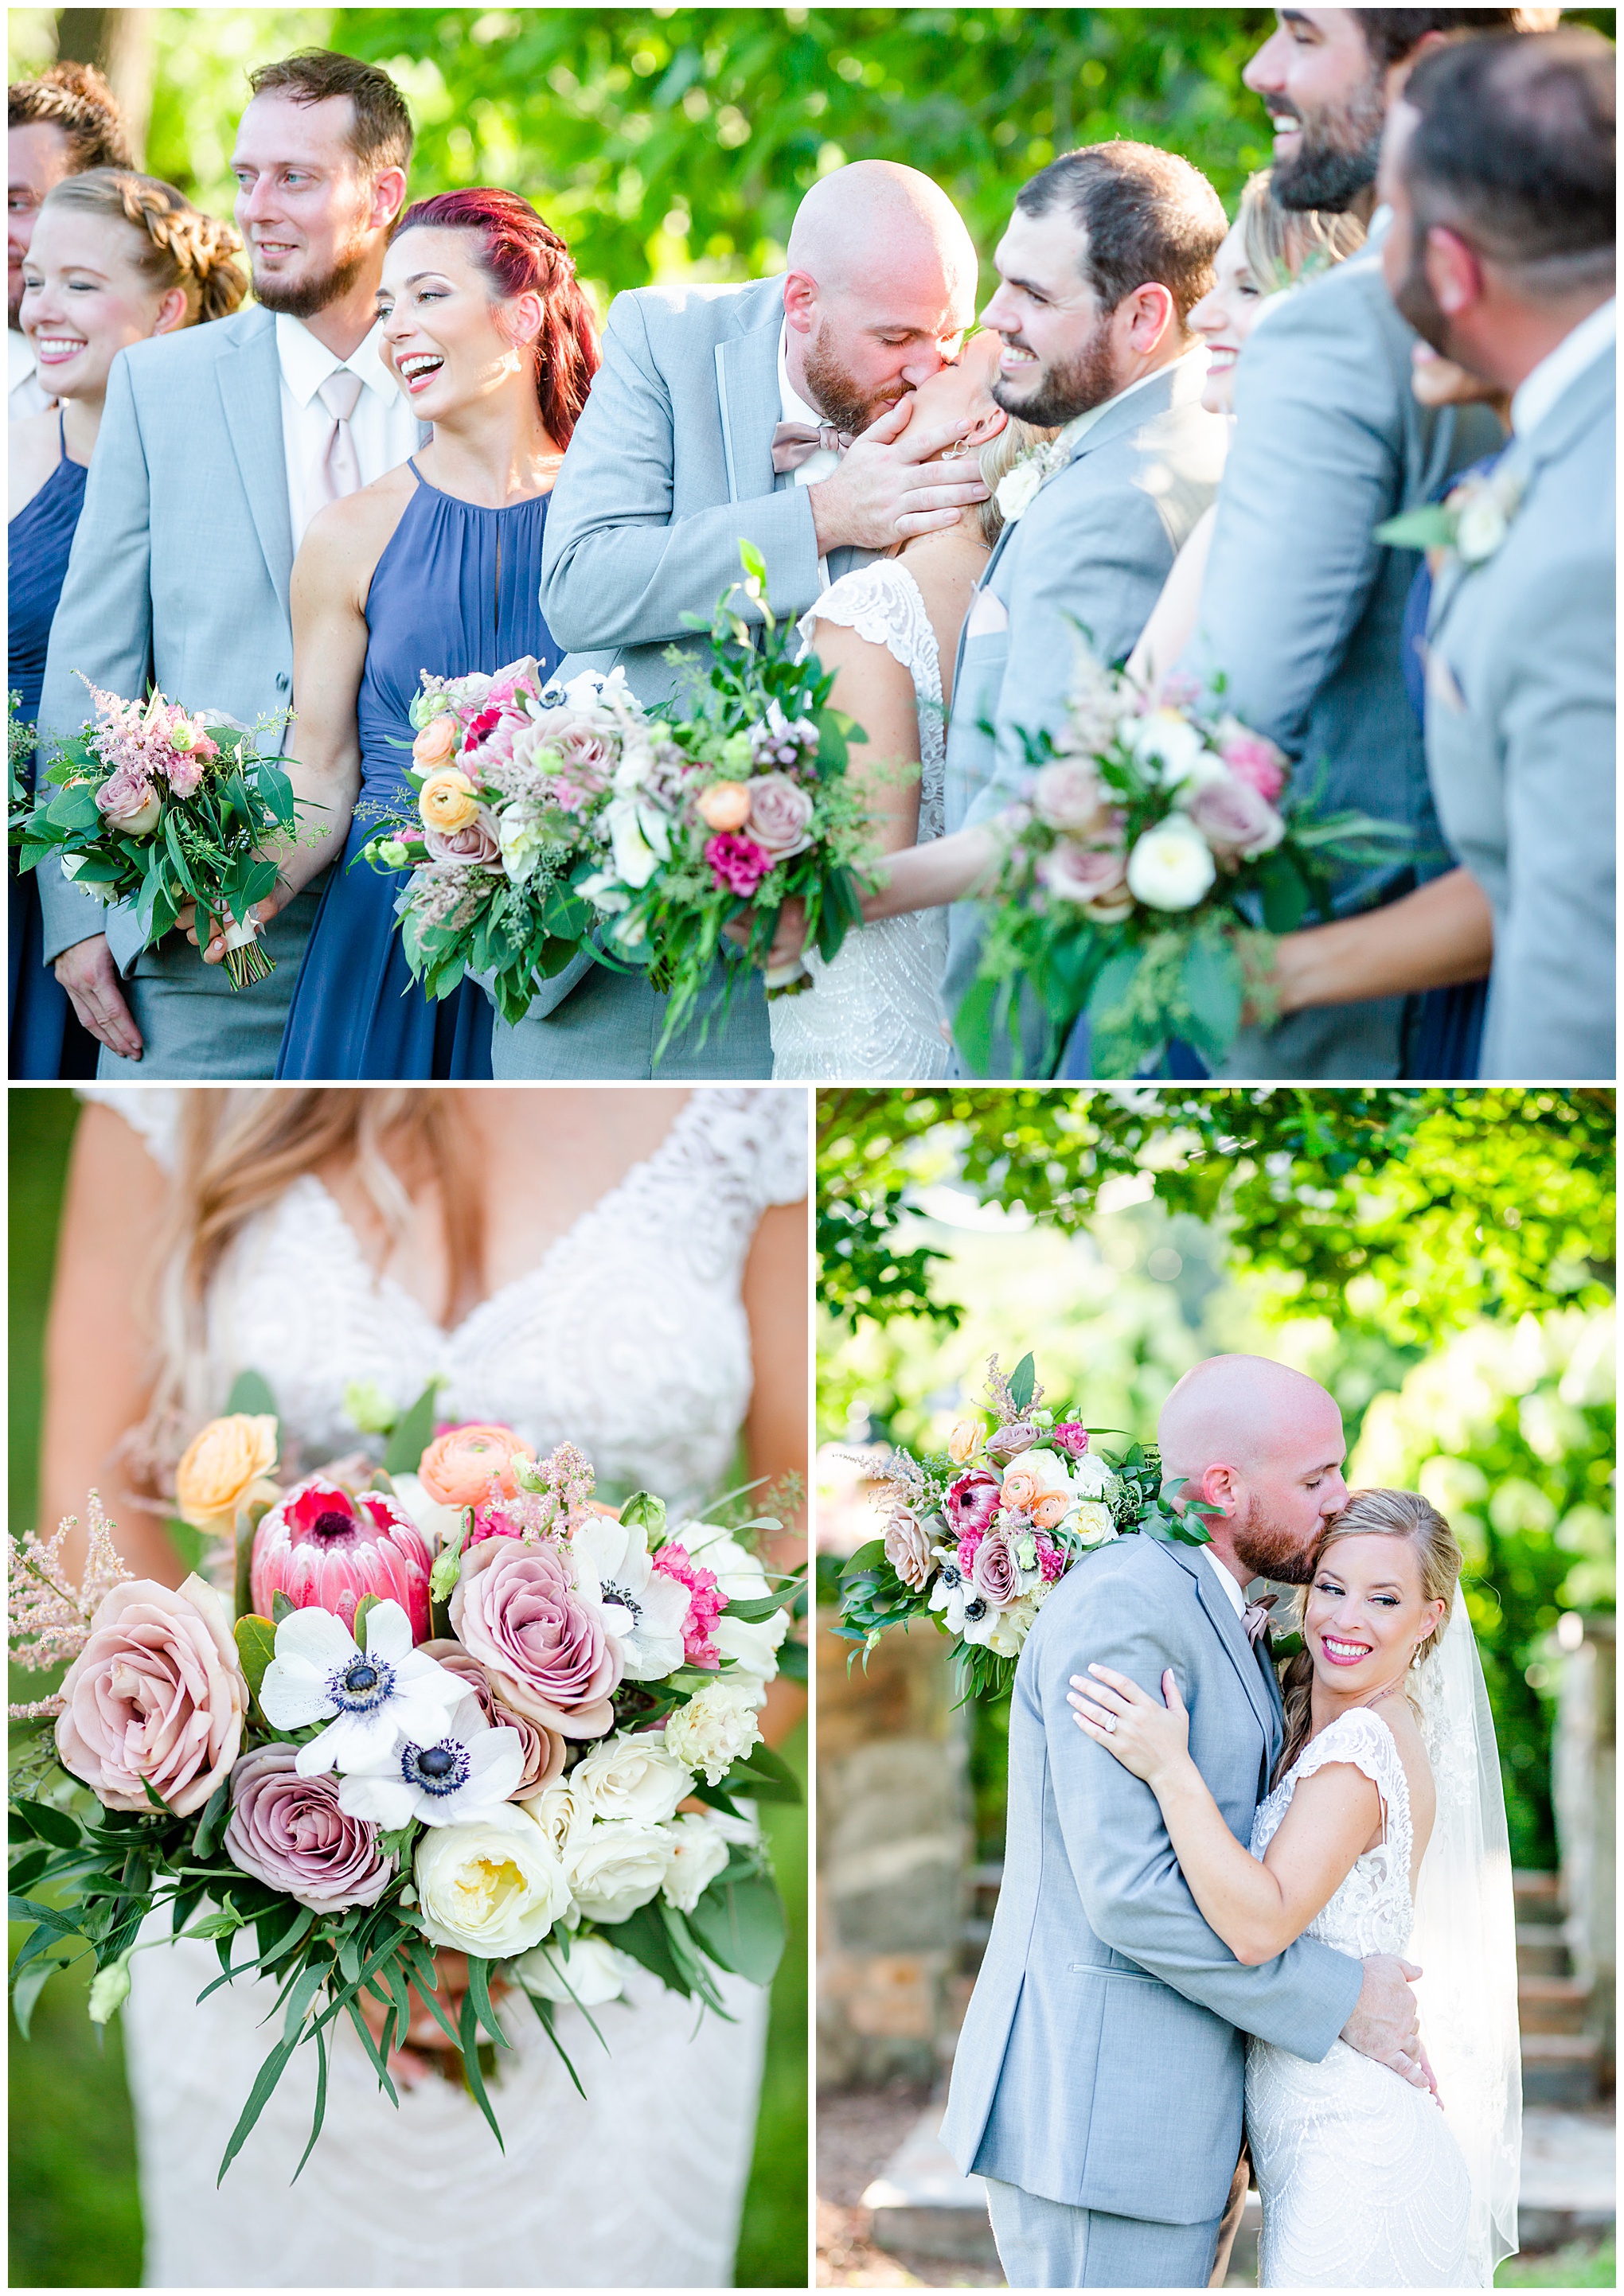 romantic Bluemont Vineyard wedding, Bluemont Vineyard, romantic wedding colors, Loudoun County wedding, Loudoun County wedding photographer, Loudoun County wedding venues, non-denominational wedding ceremony, Rachel E.H. Photography, Virginia wedding, rural wedding, rustic wedding, romantic wedding, romantic aesthetic, outdoor wedding, Bend in the River Farms bridal bouquet, newlywed portraits